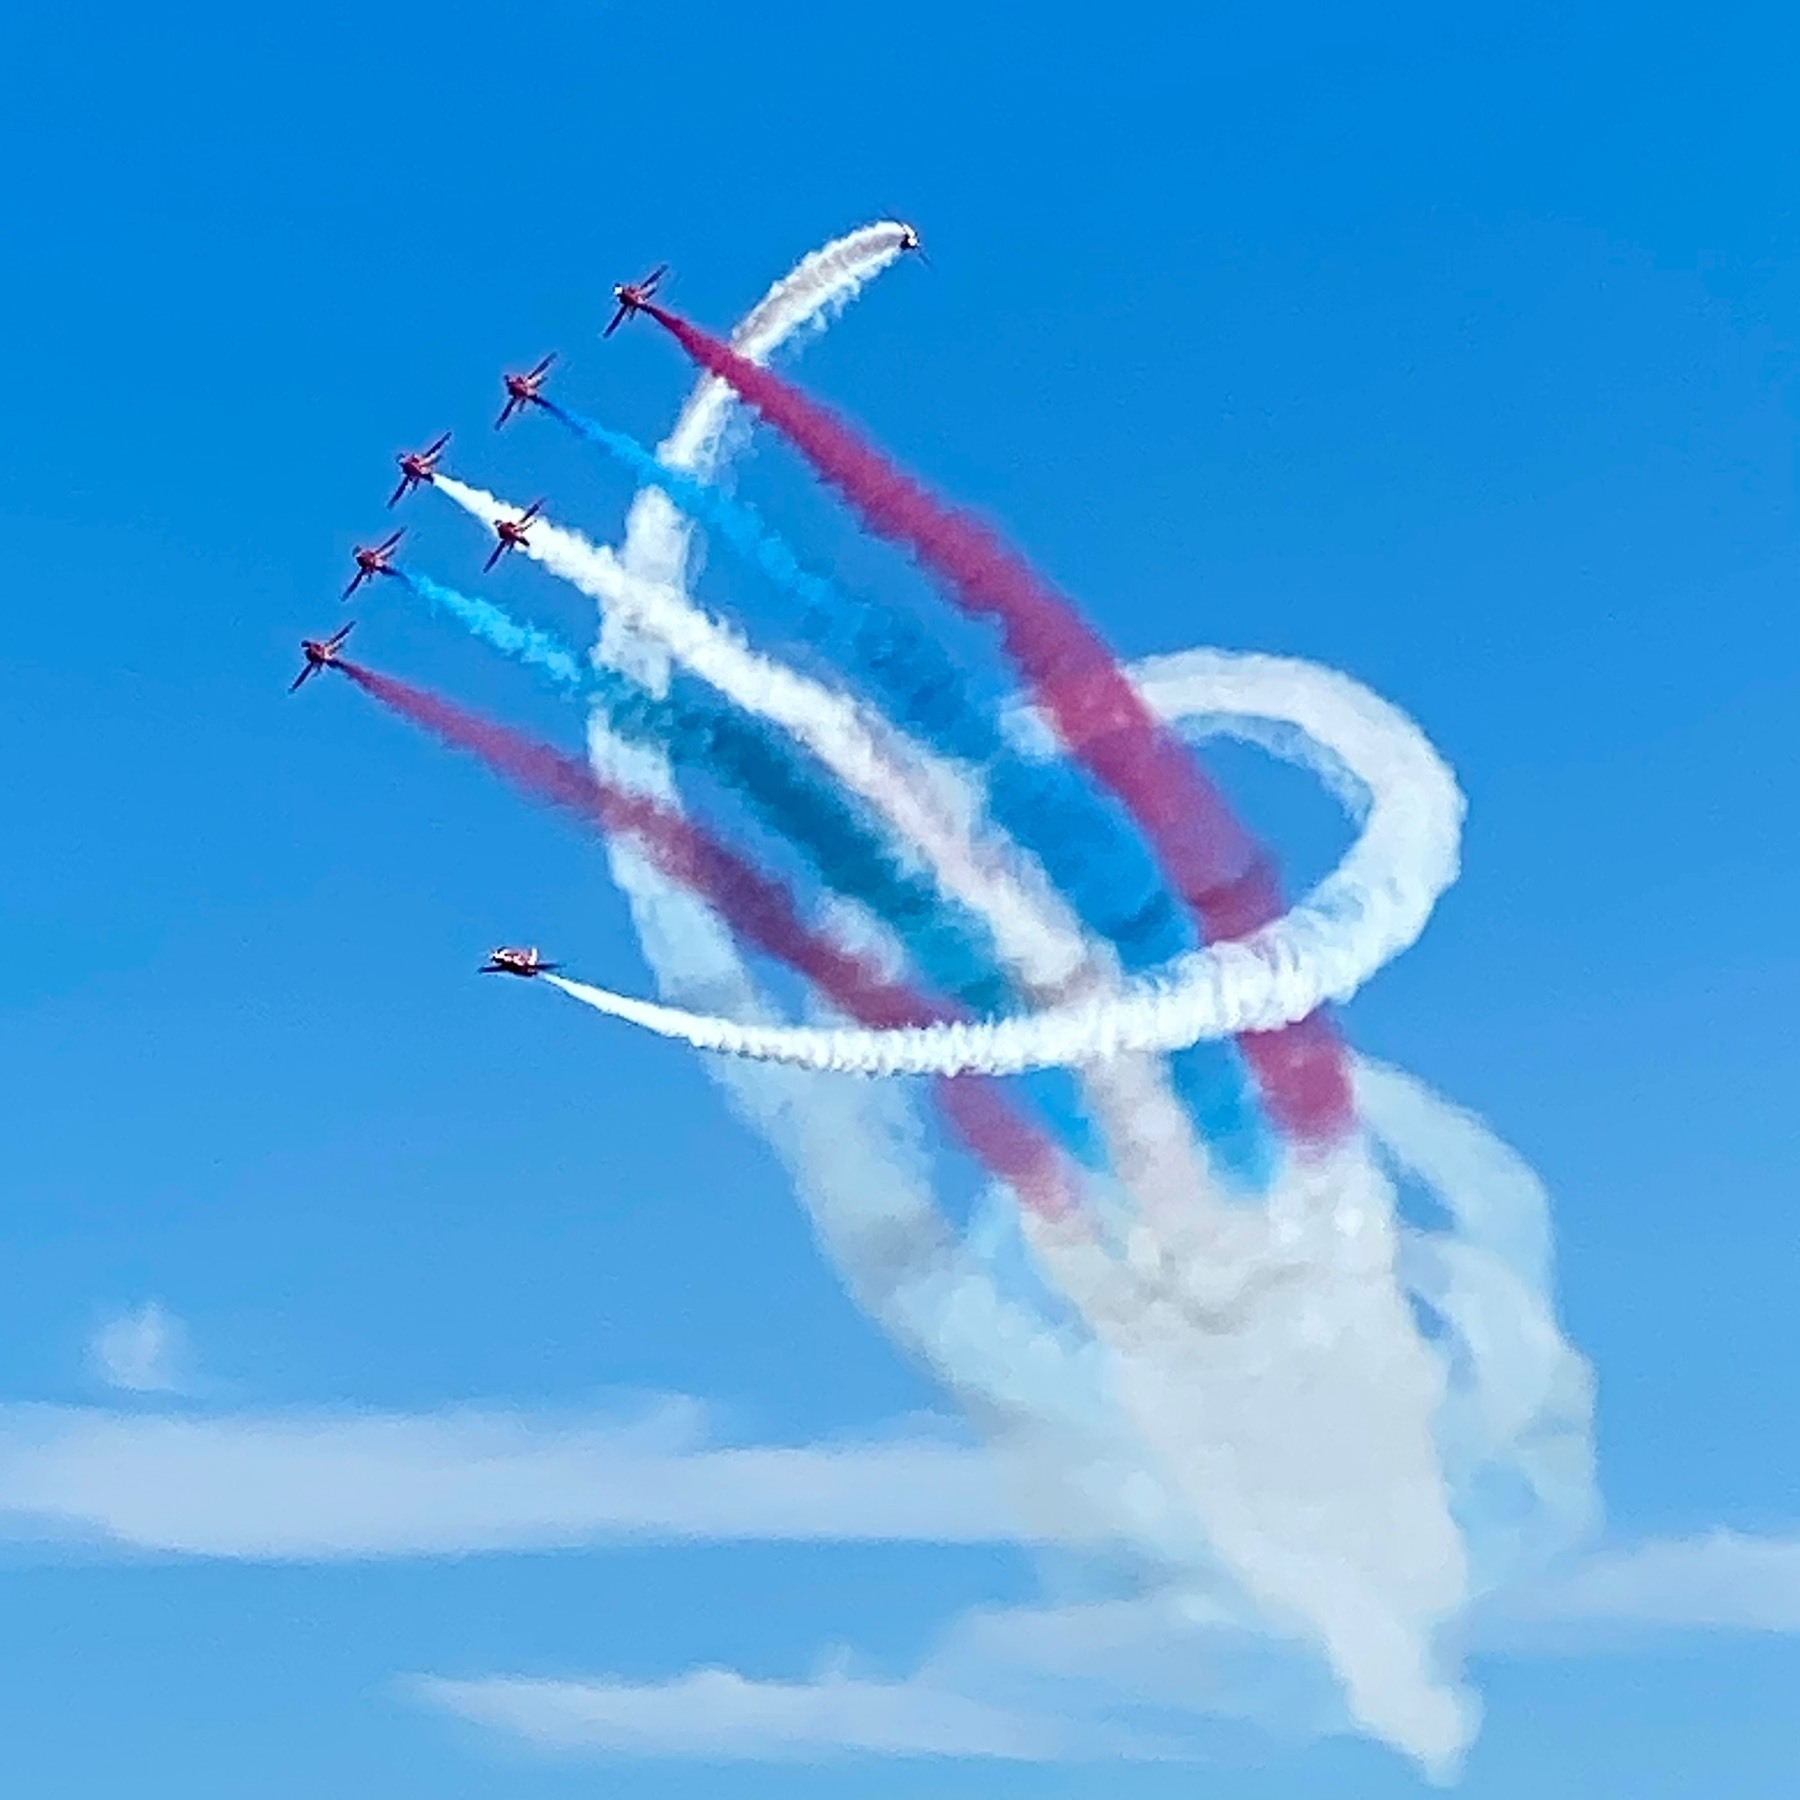 Flying formation; six planes in the middle, two emitting red smoke, two blue, one white, with two more flying round them in a corkscrew emitting white smoke